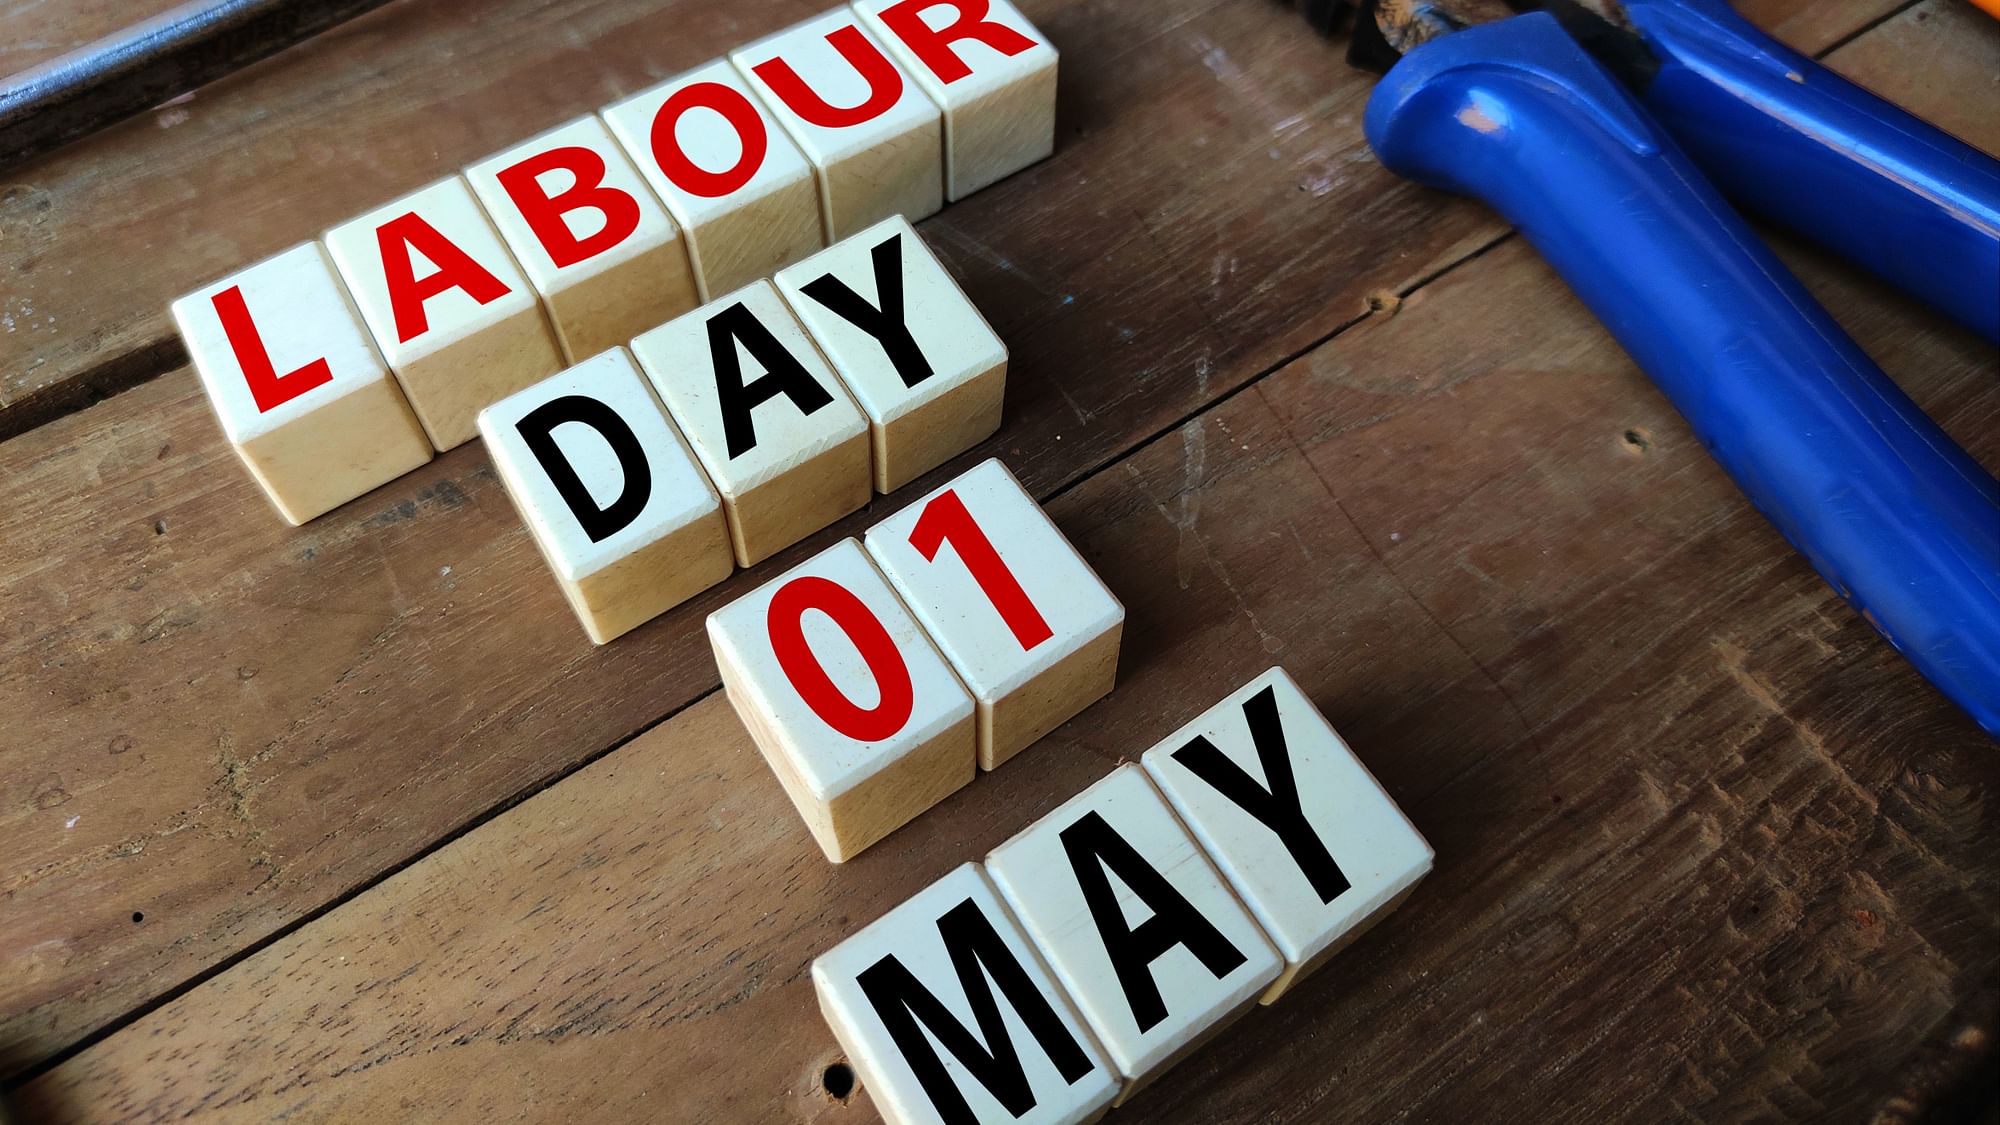 <div class="paragraphs"><p>International Workers Day 2022 wishes, images and posters.</p></div>